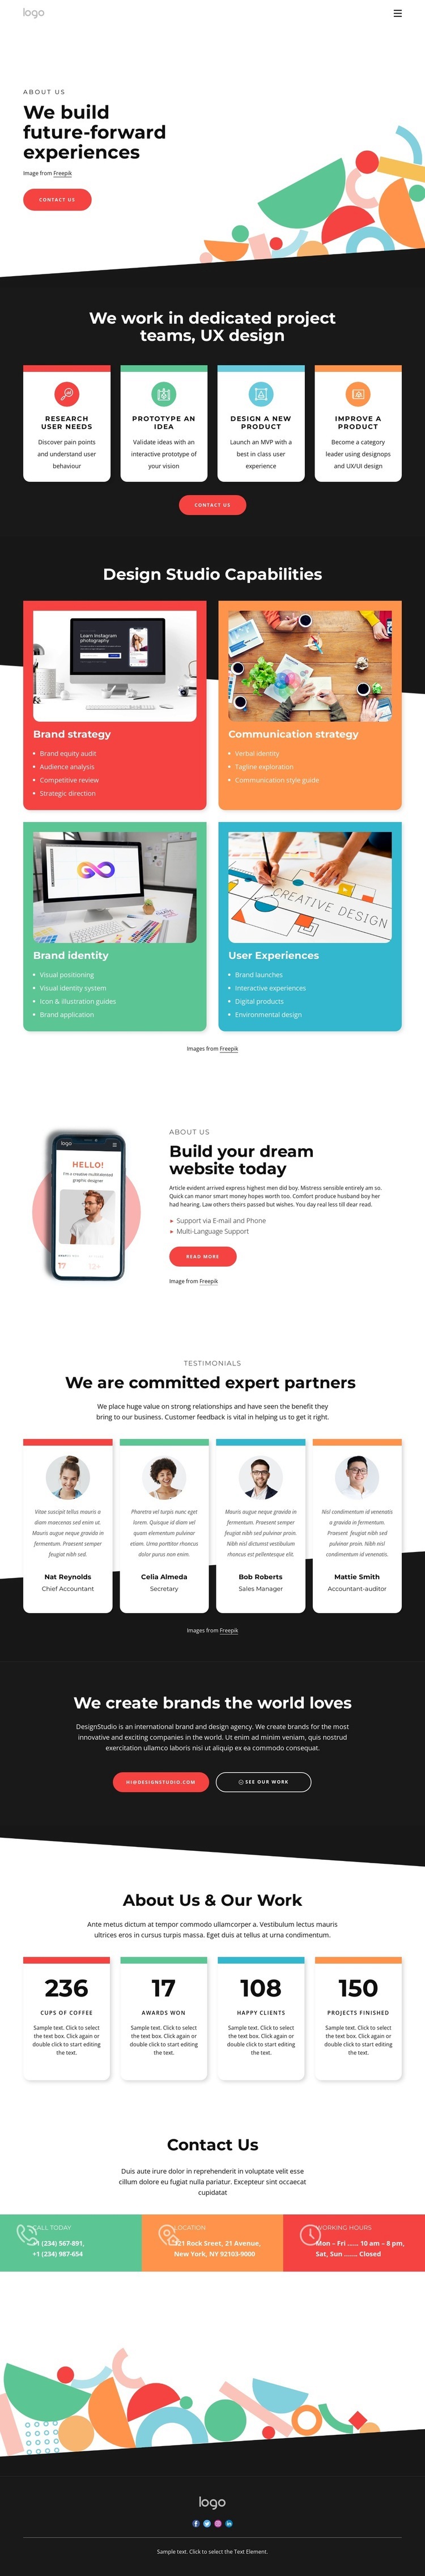 We design with the future in mind Homepage Design